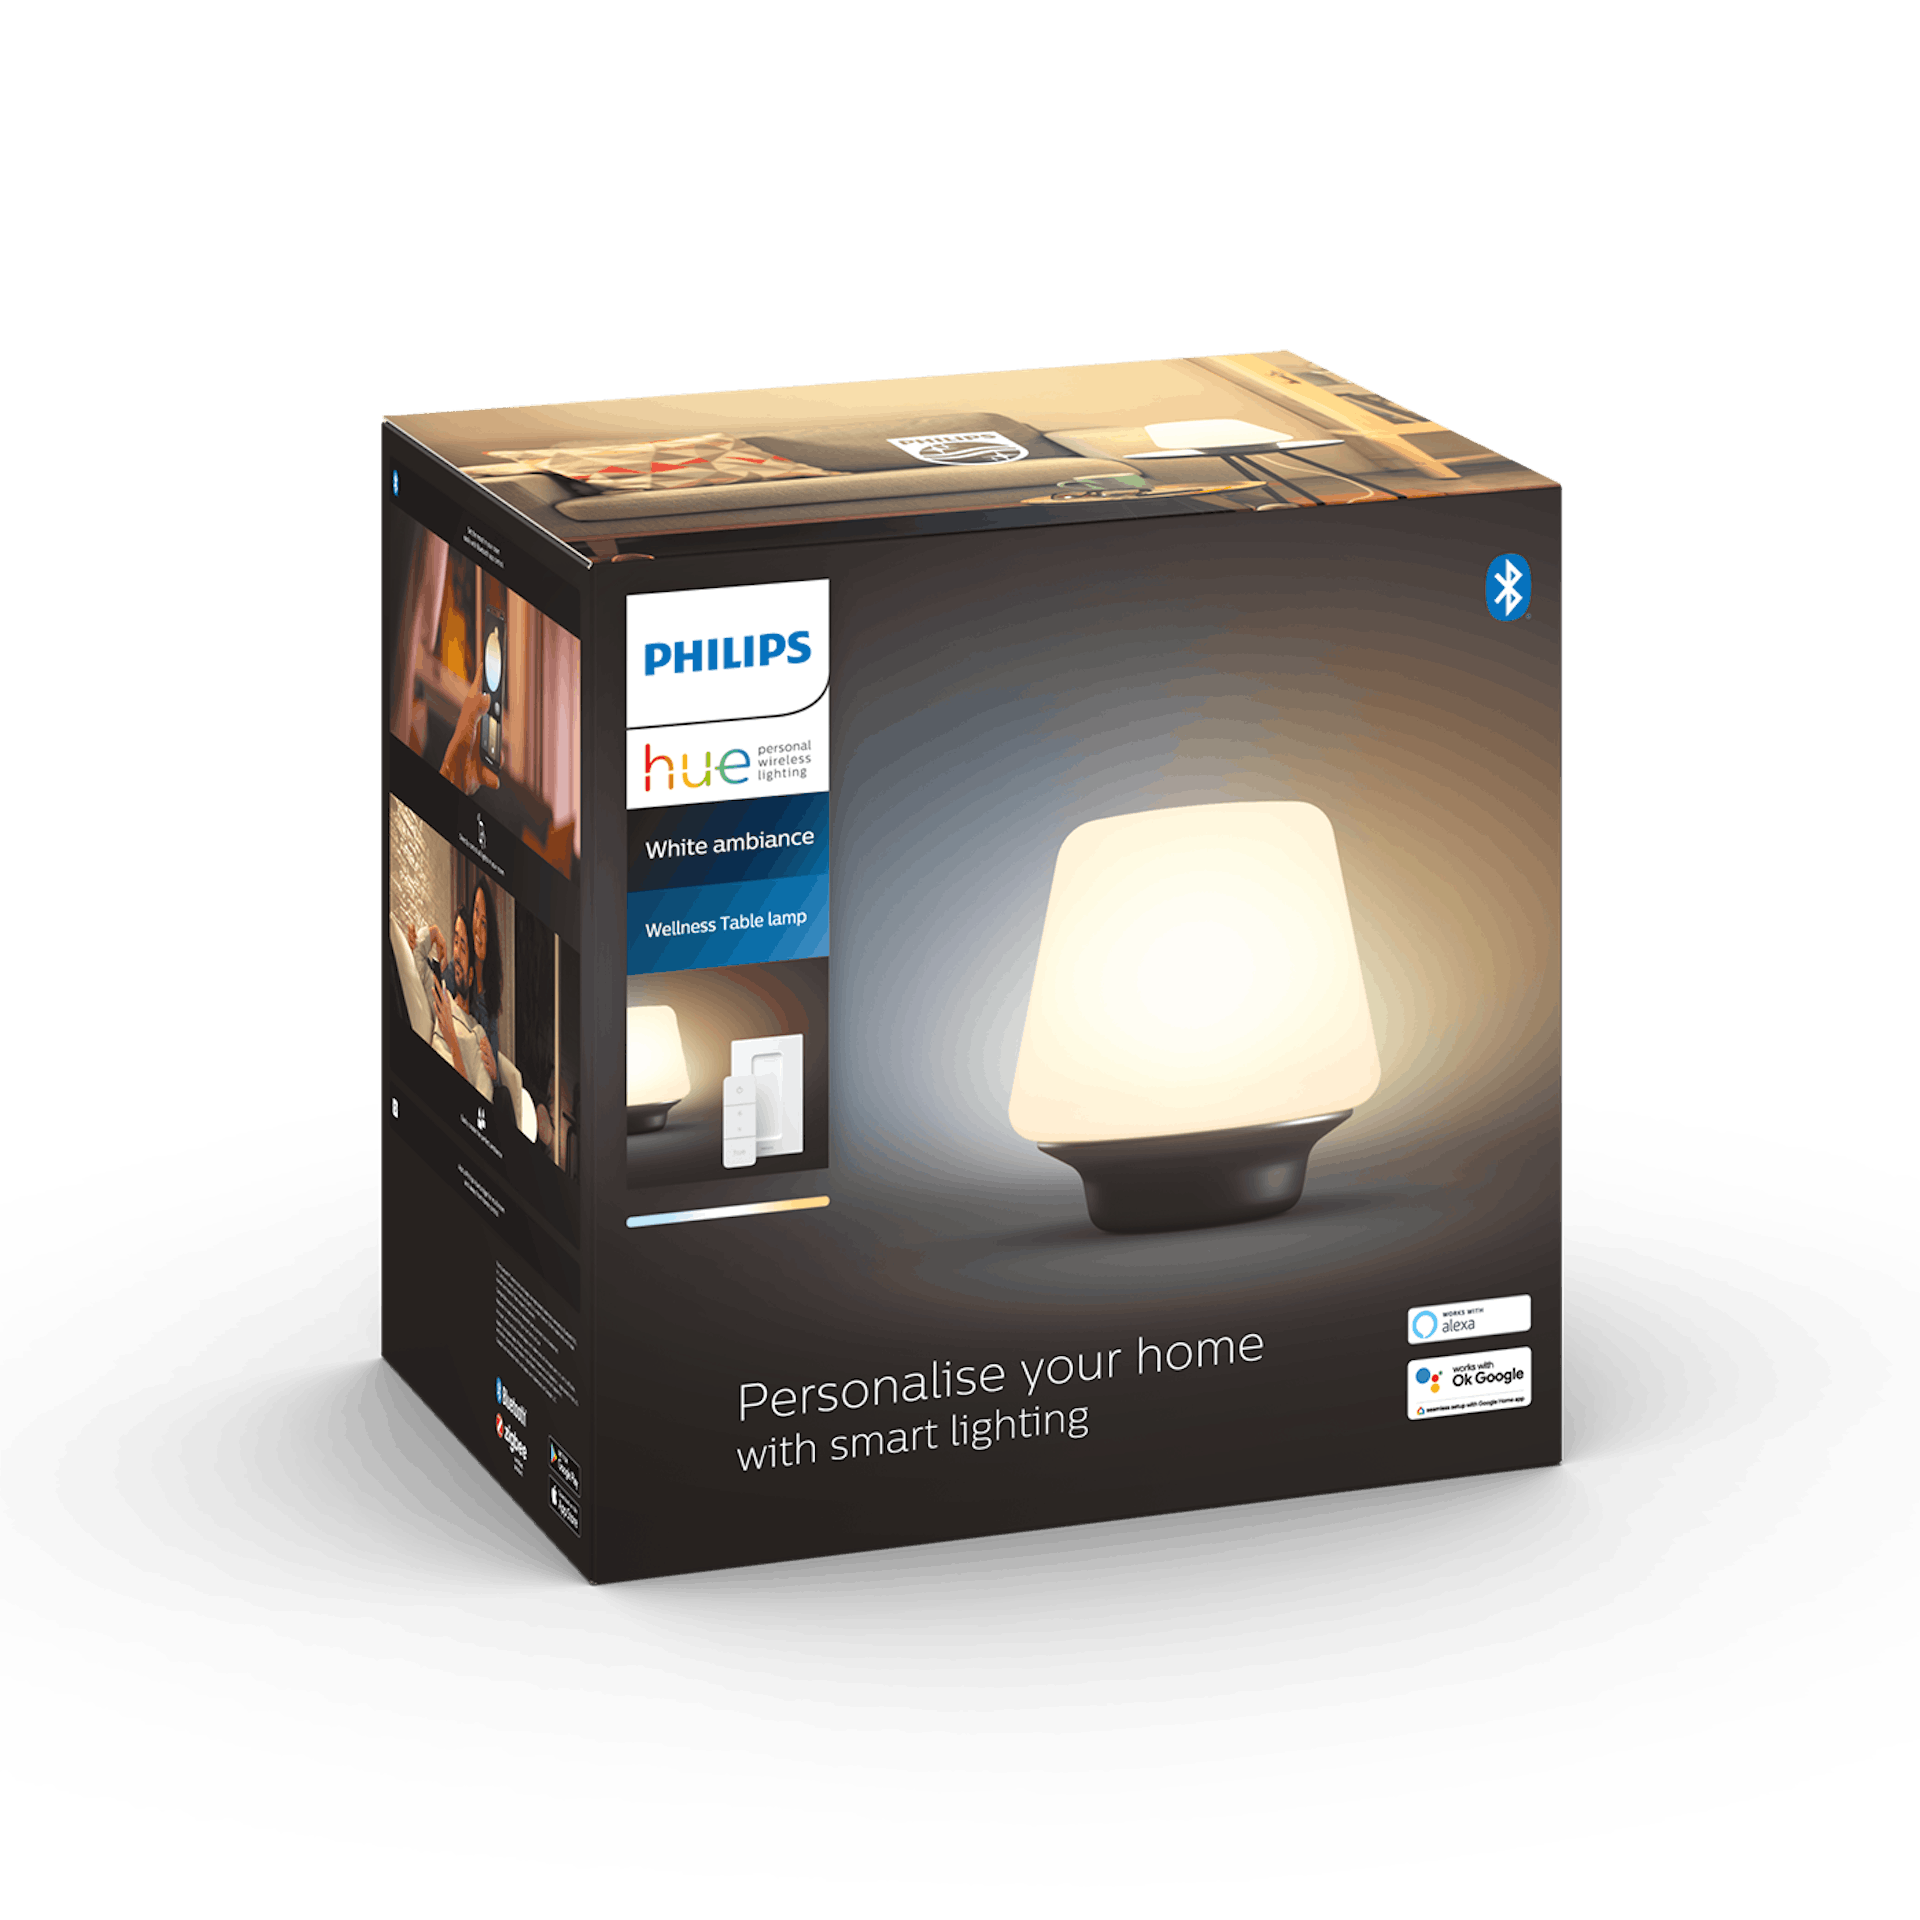 Philips Hue Wellness - Details - Package image